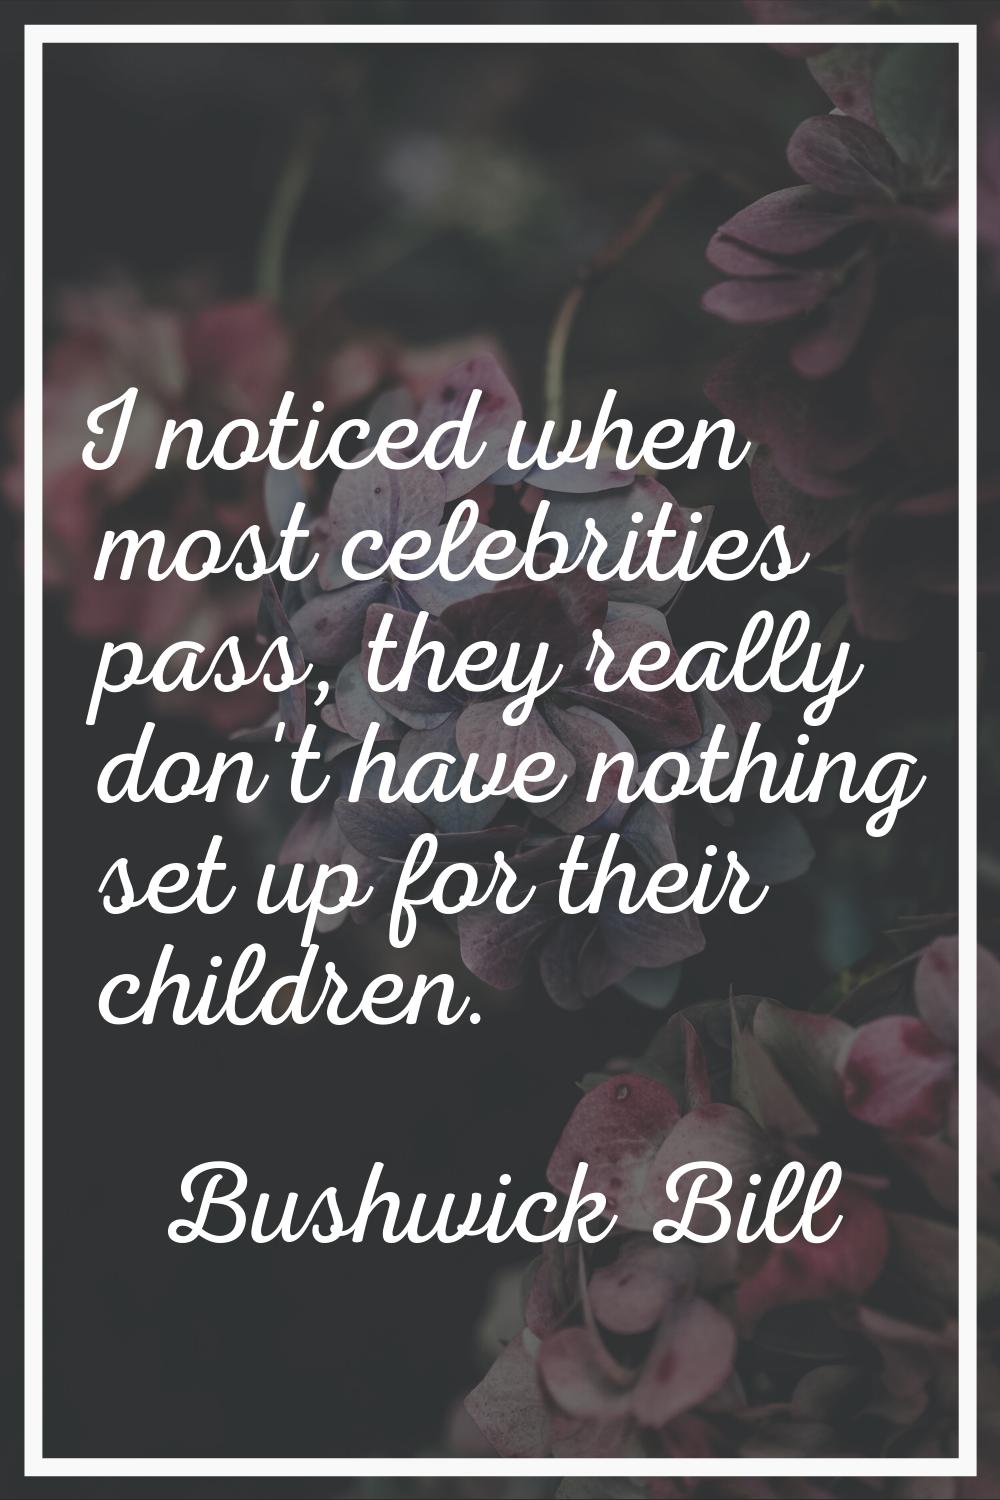 I noticed when most celebrities pass, they really don't have nothing set up for their children.